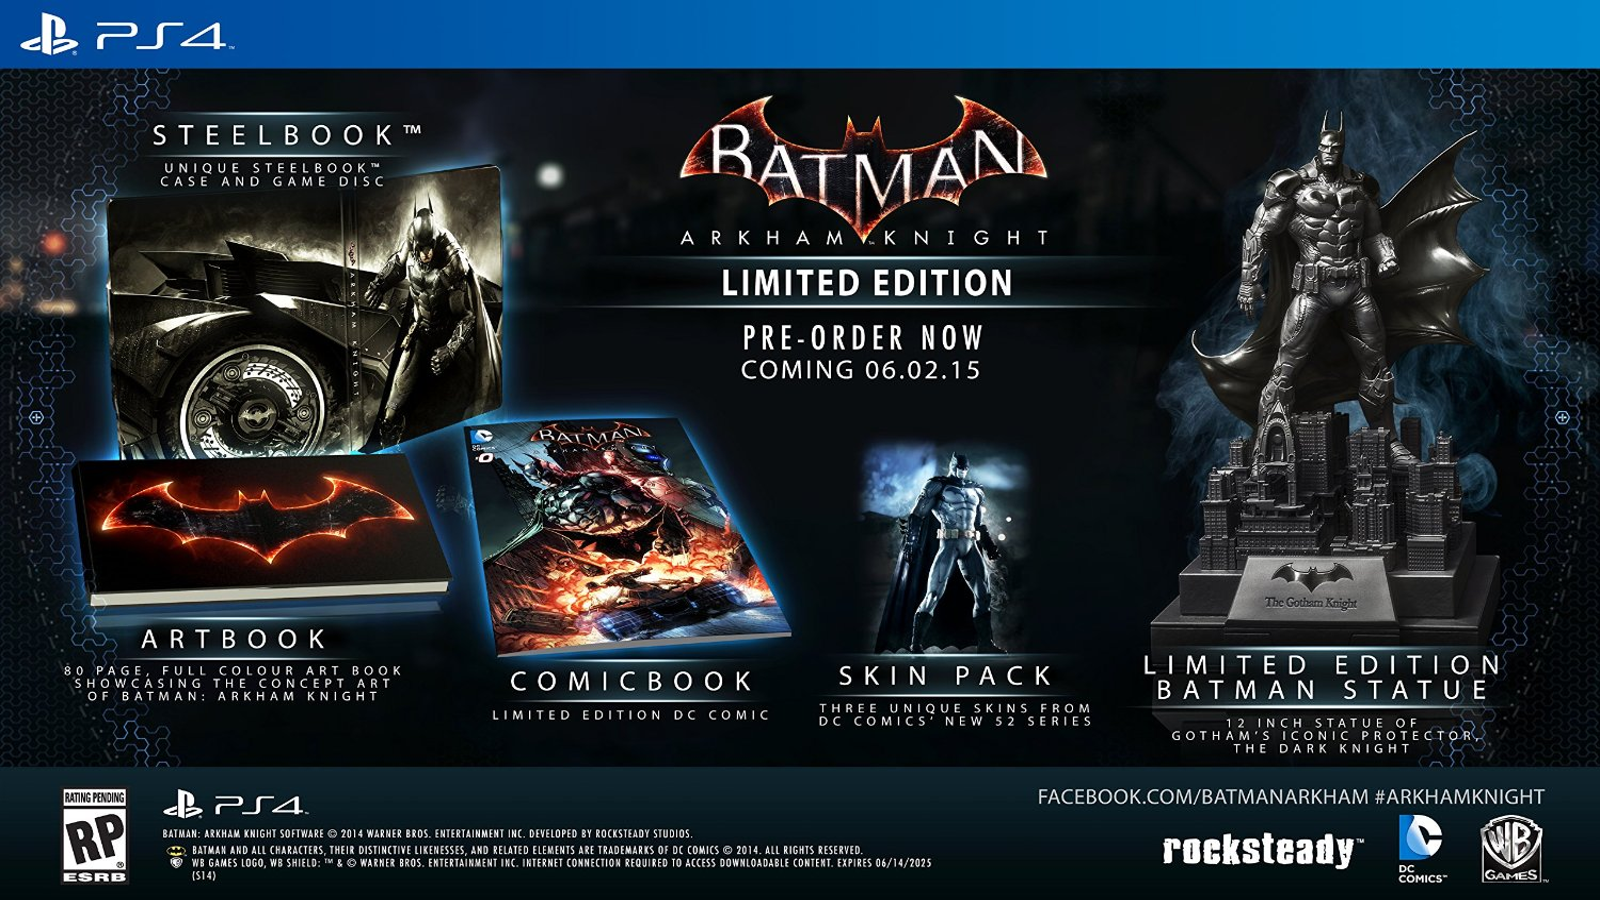 Batman: Arkham Knight Limited Edition delayed over 